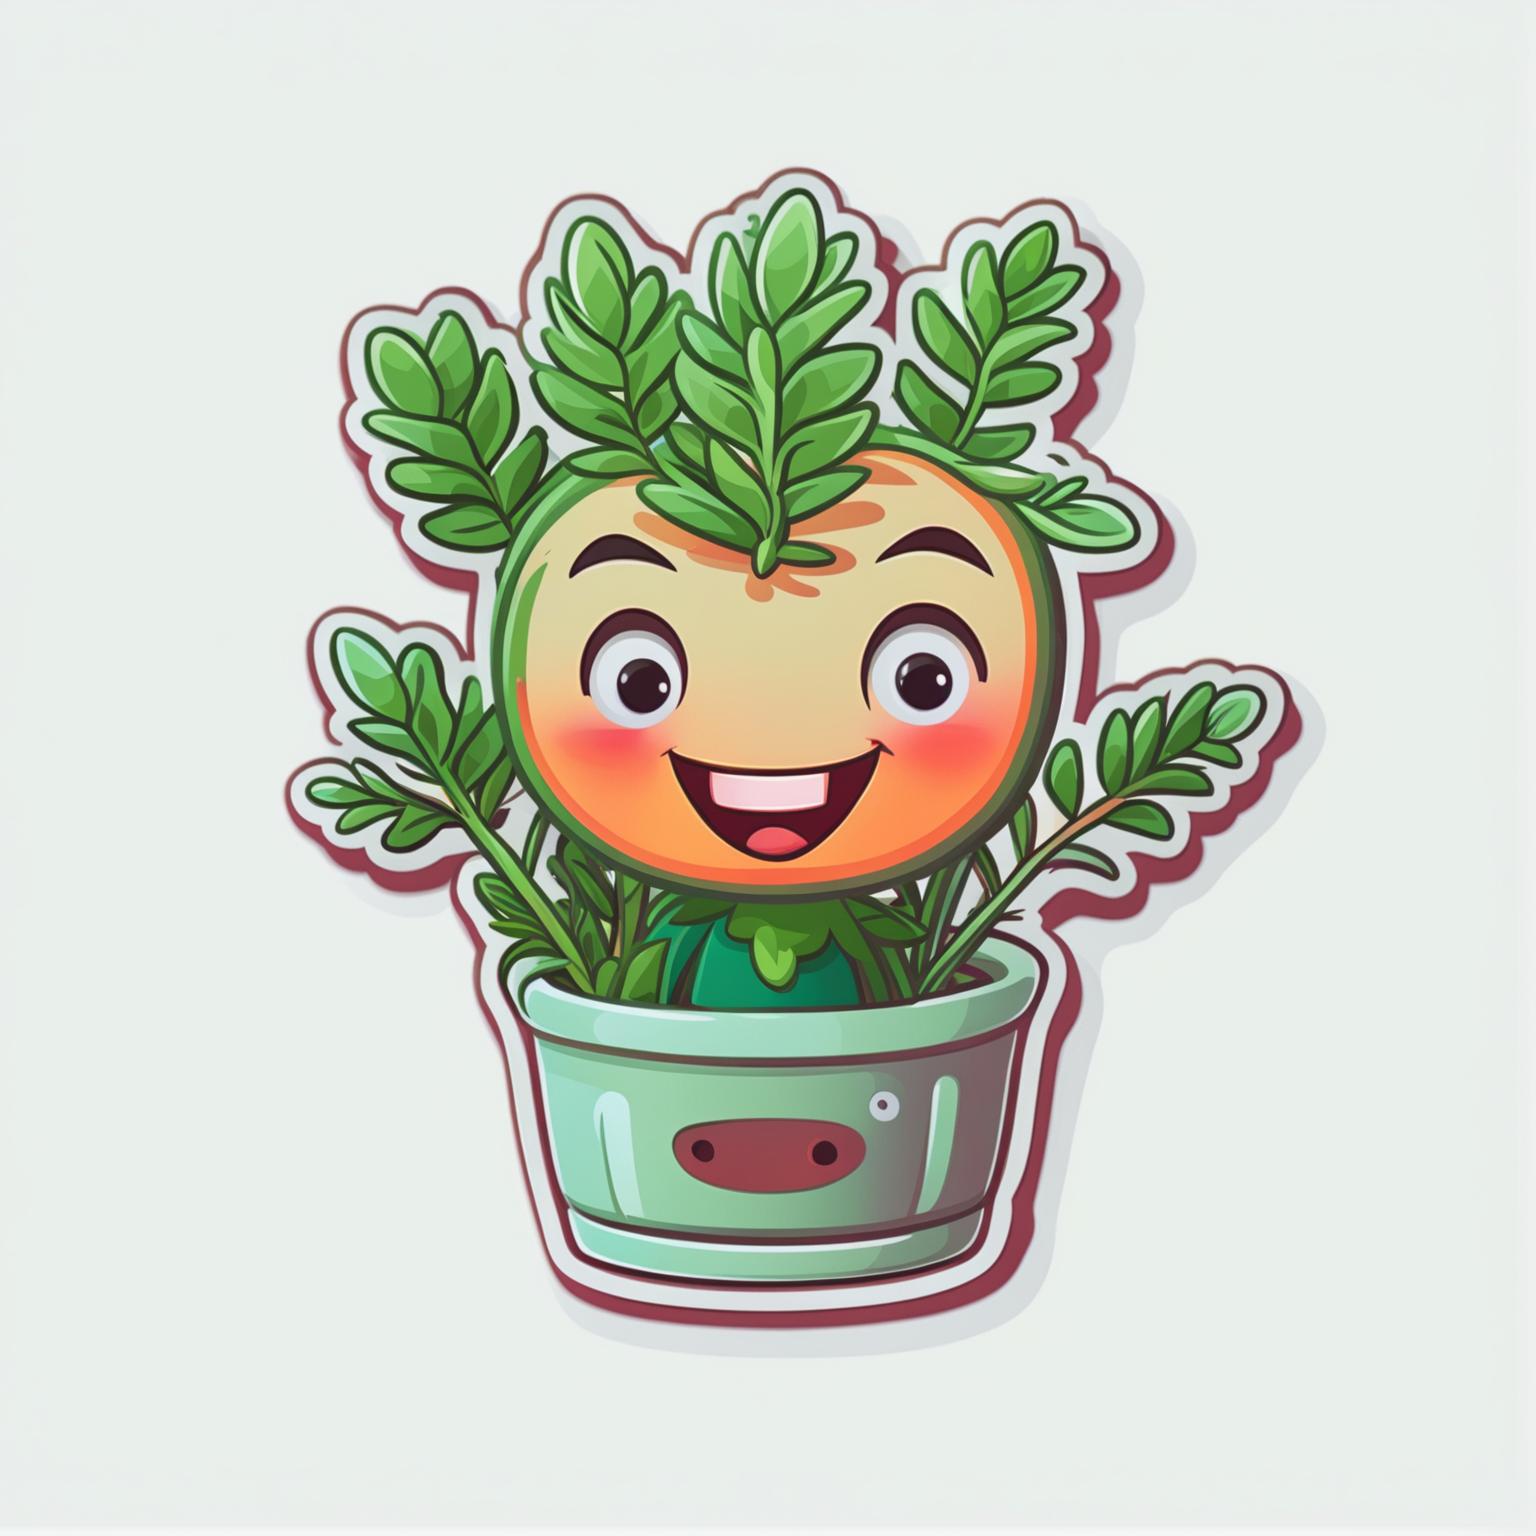 Design a cute Rosemary herb plant sticker with needle-like leaves and a woody stem